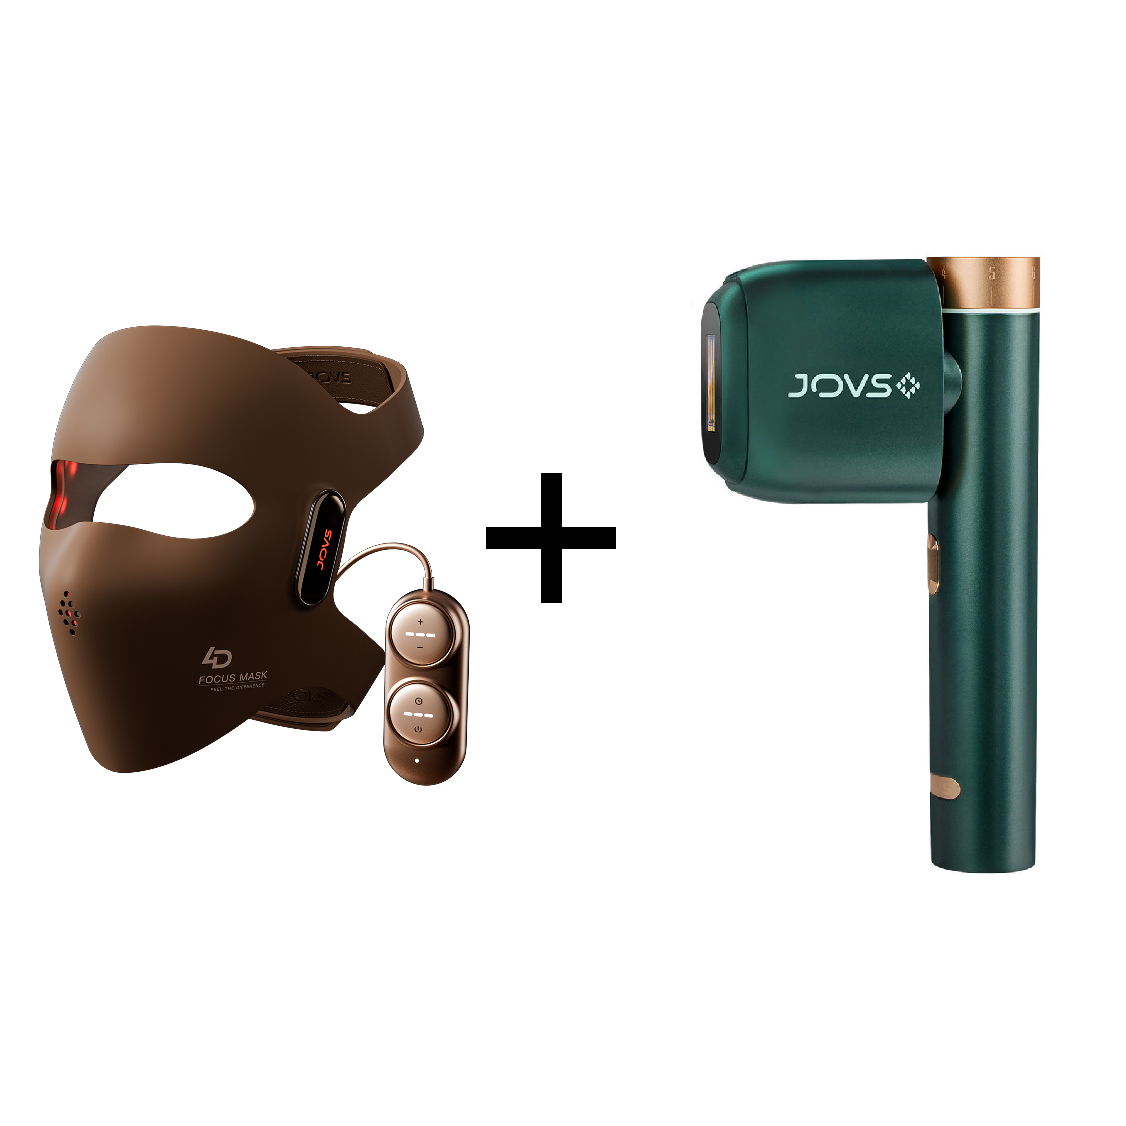 JOVS 4D Laser Mask for photorejuvenation paired with the JOVS Venus Pro™ II IPL Hair Removal Device, offering a comprehensive beauty and skincare solution.